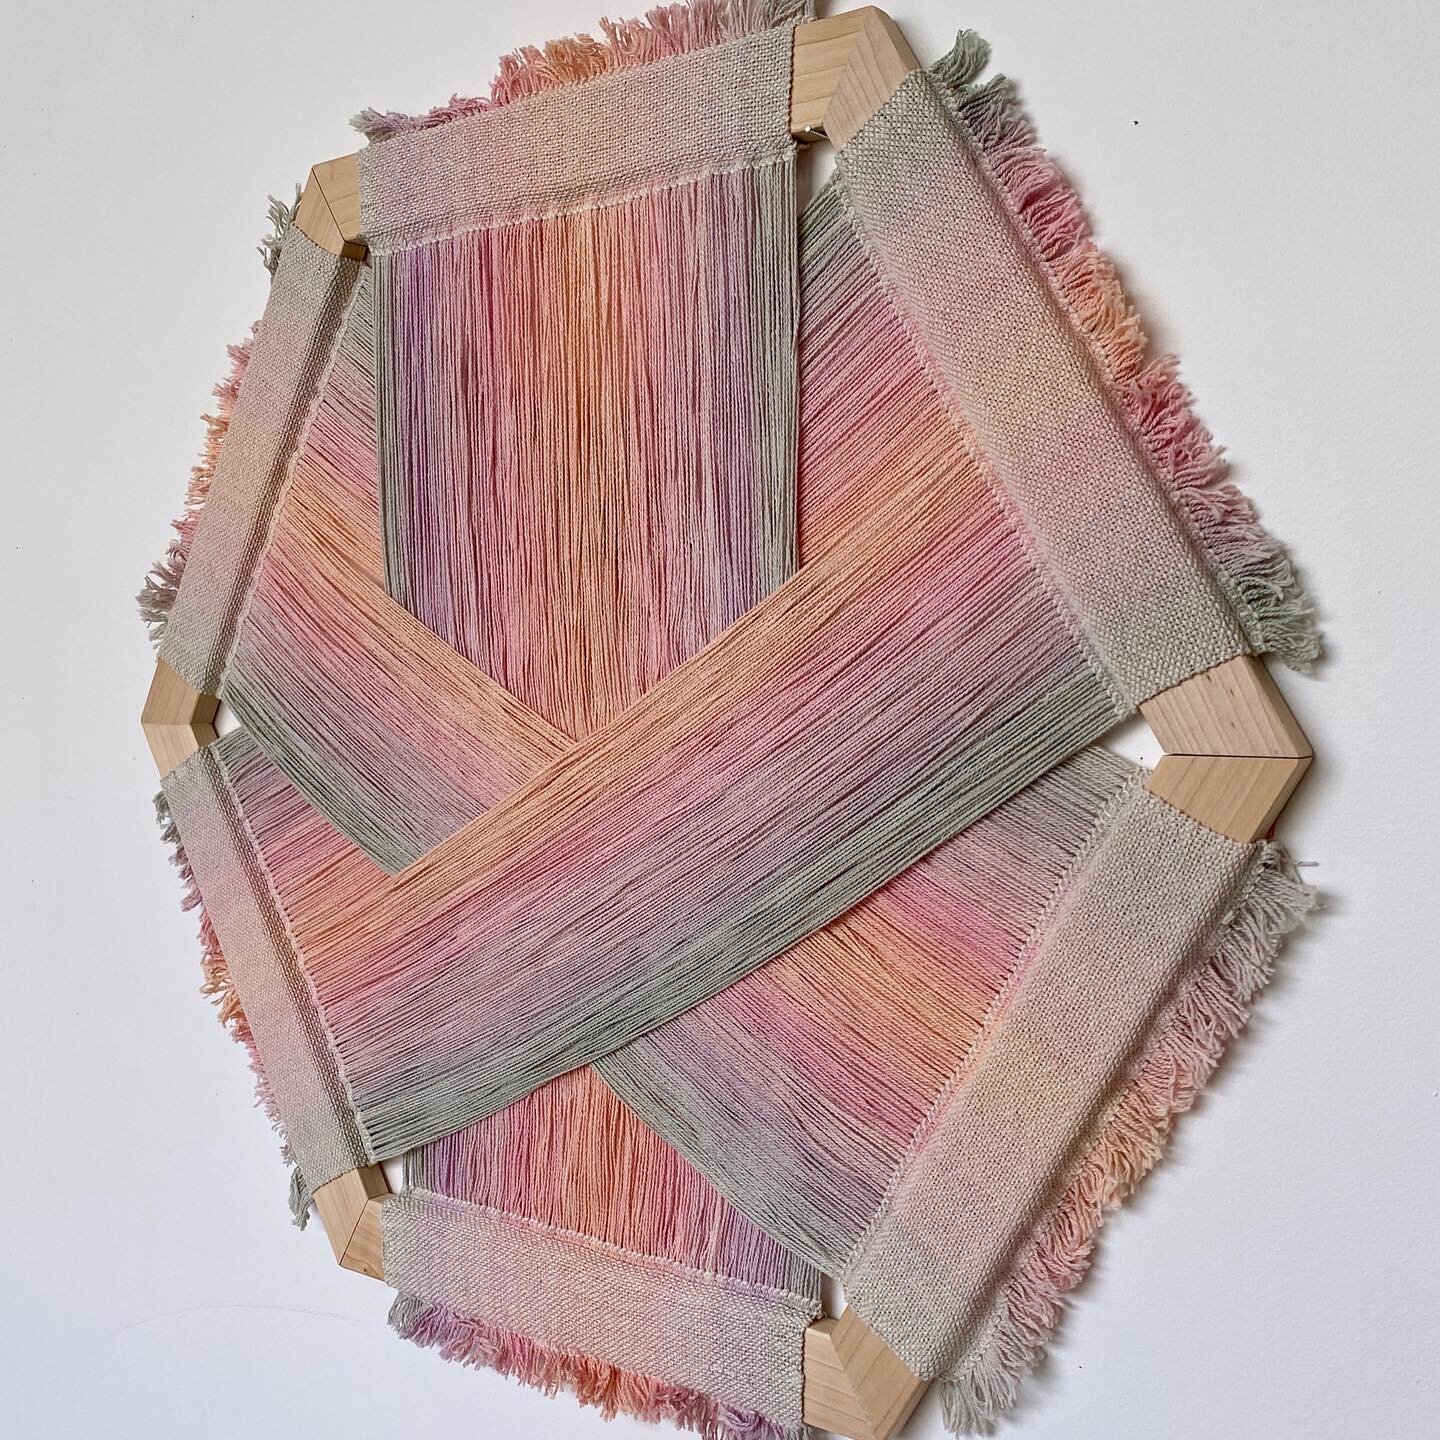 Held Again, 2021, 34&quot; x 32&quot;, hand painted cotton warp in #doubleweave on white maple frame
⠀⠀⠀⠀⠀⠀⠀⠀⠀
In a previous post I talked about mistakes; in this, meaning. My pentagon and hexagon pieces explore the idea of musculature in the body. M